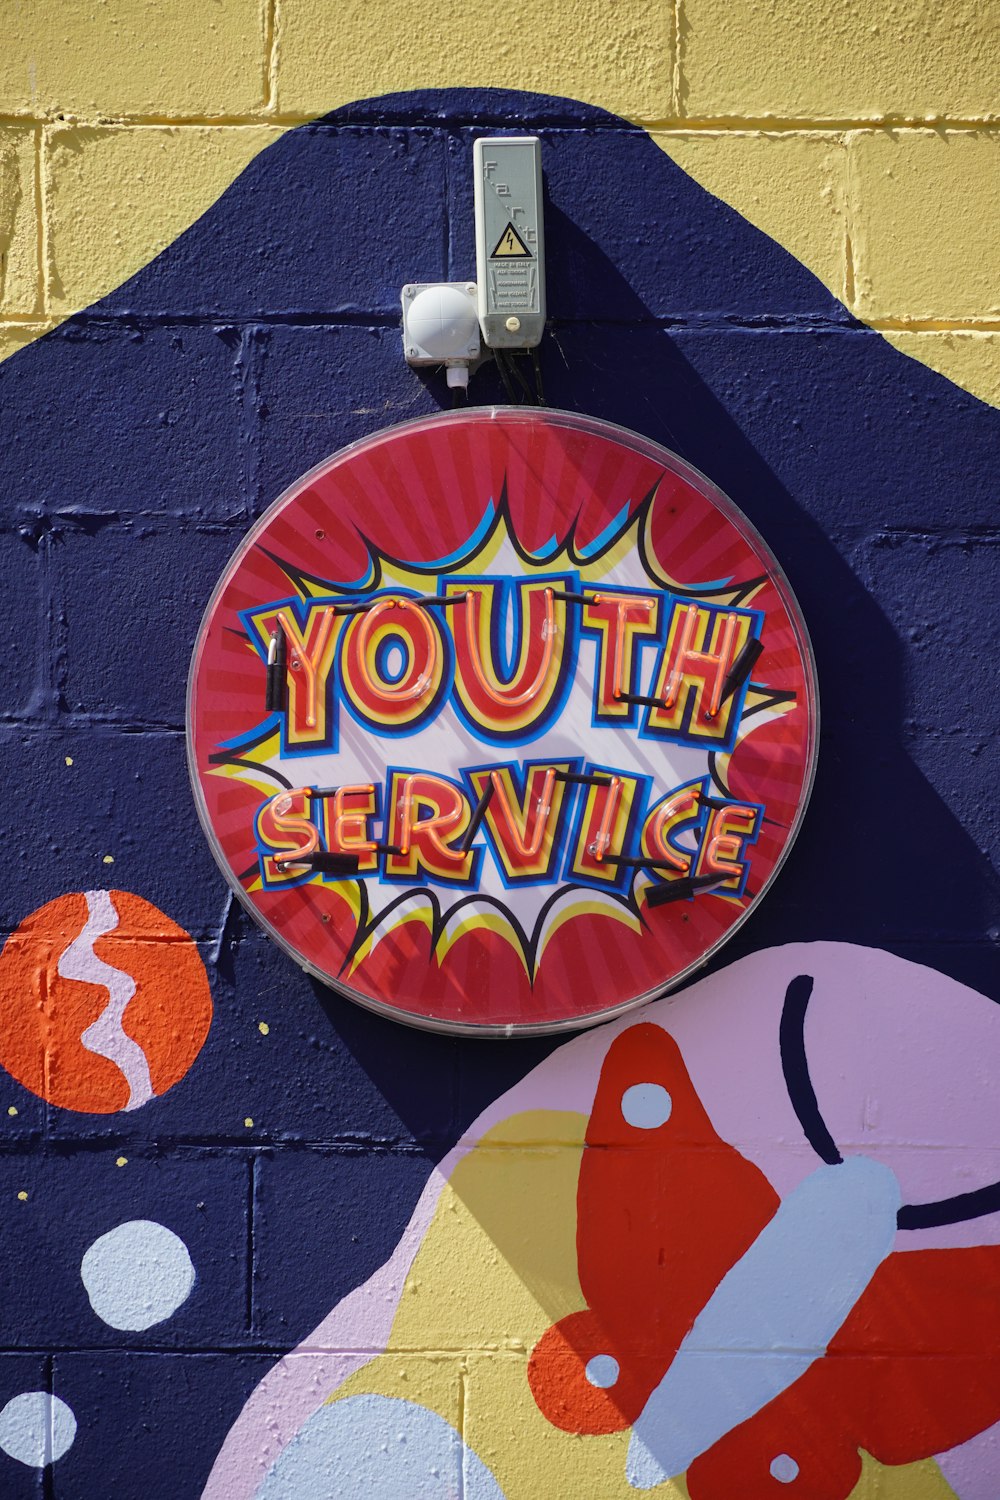 a sign on the side of a building that says youth service